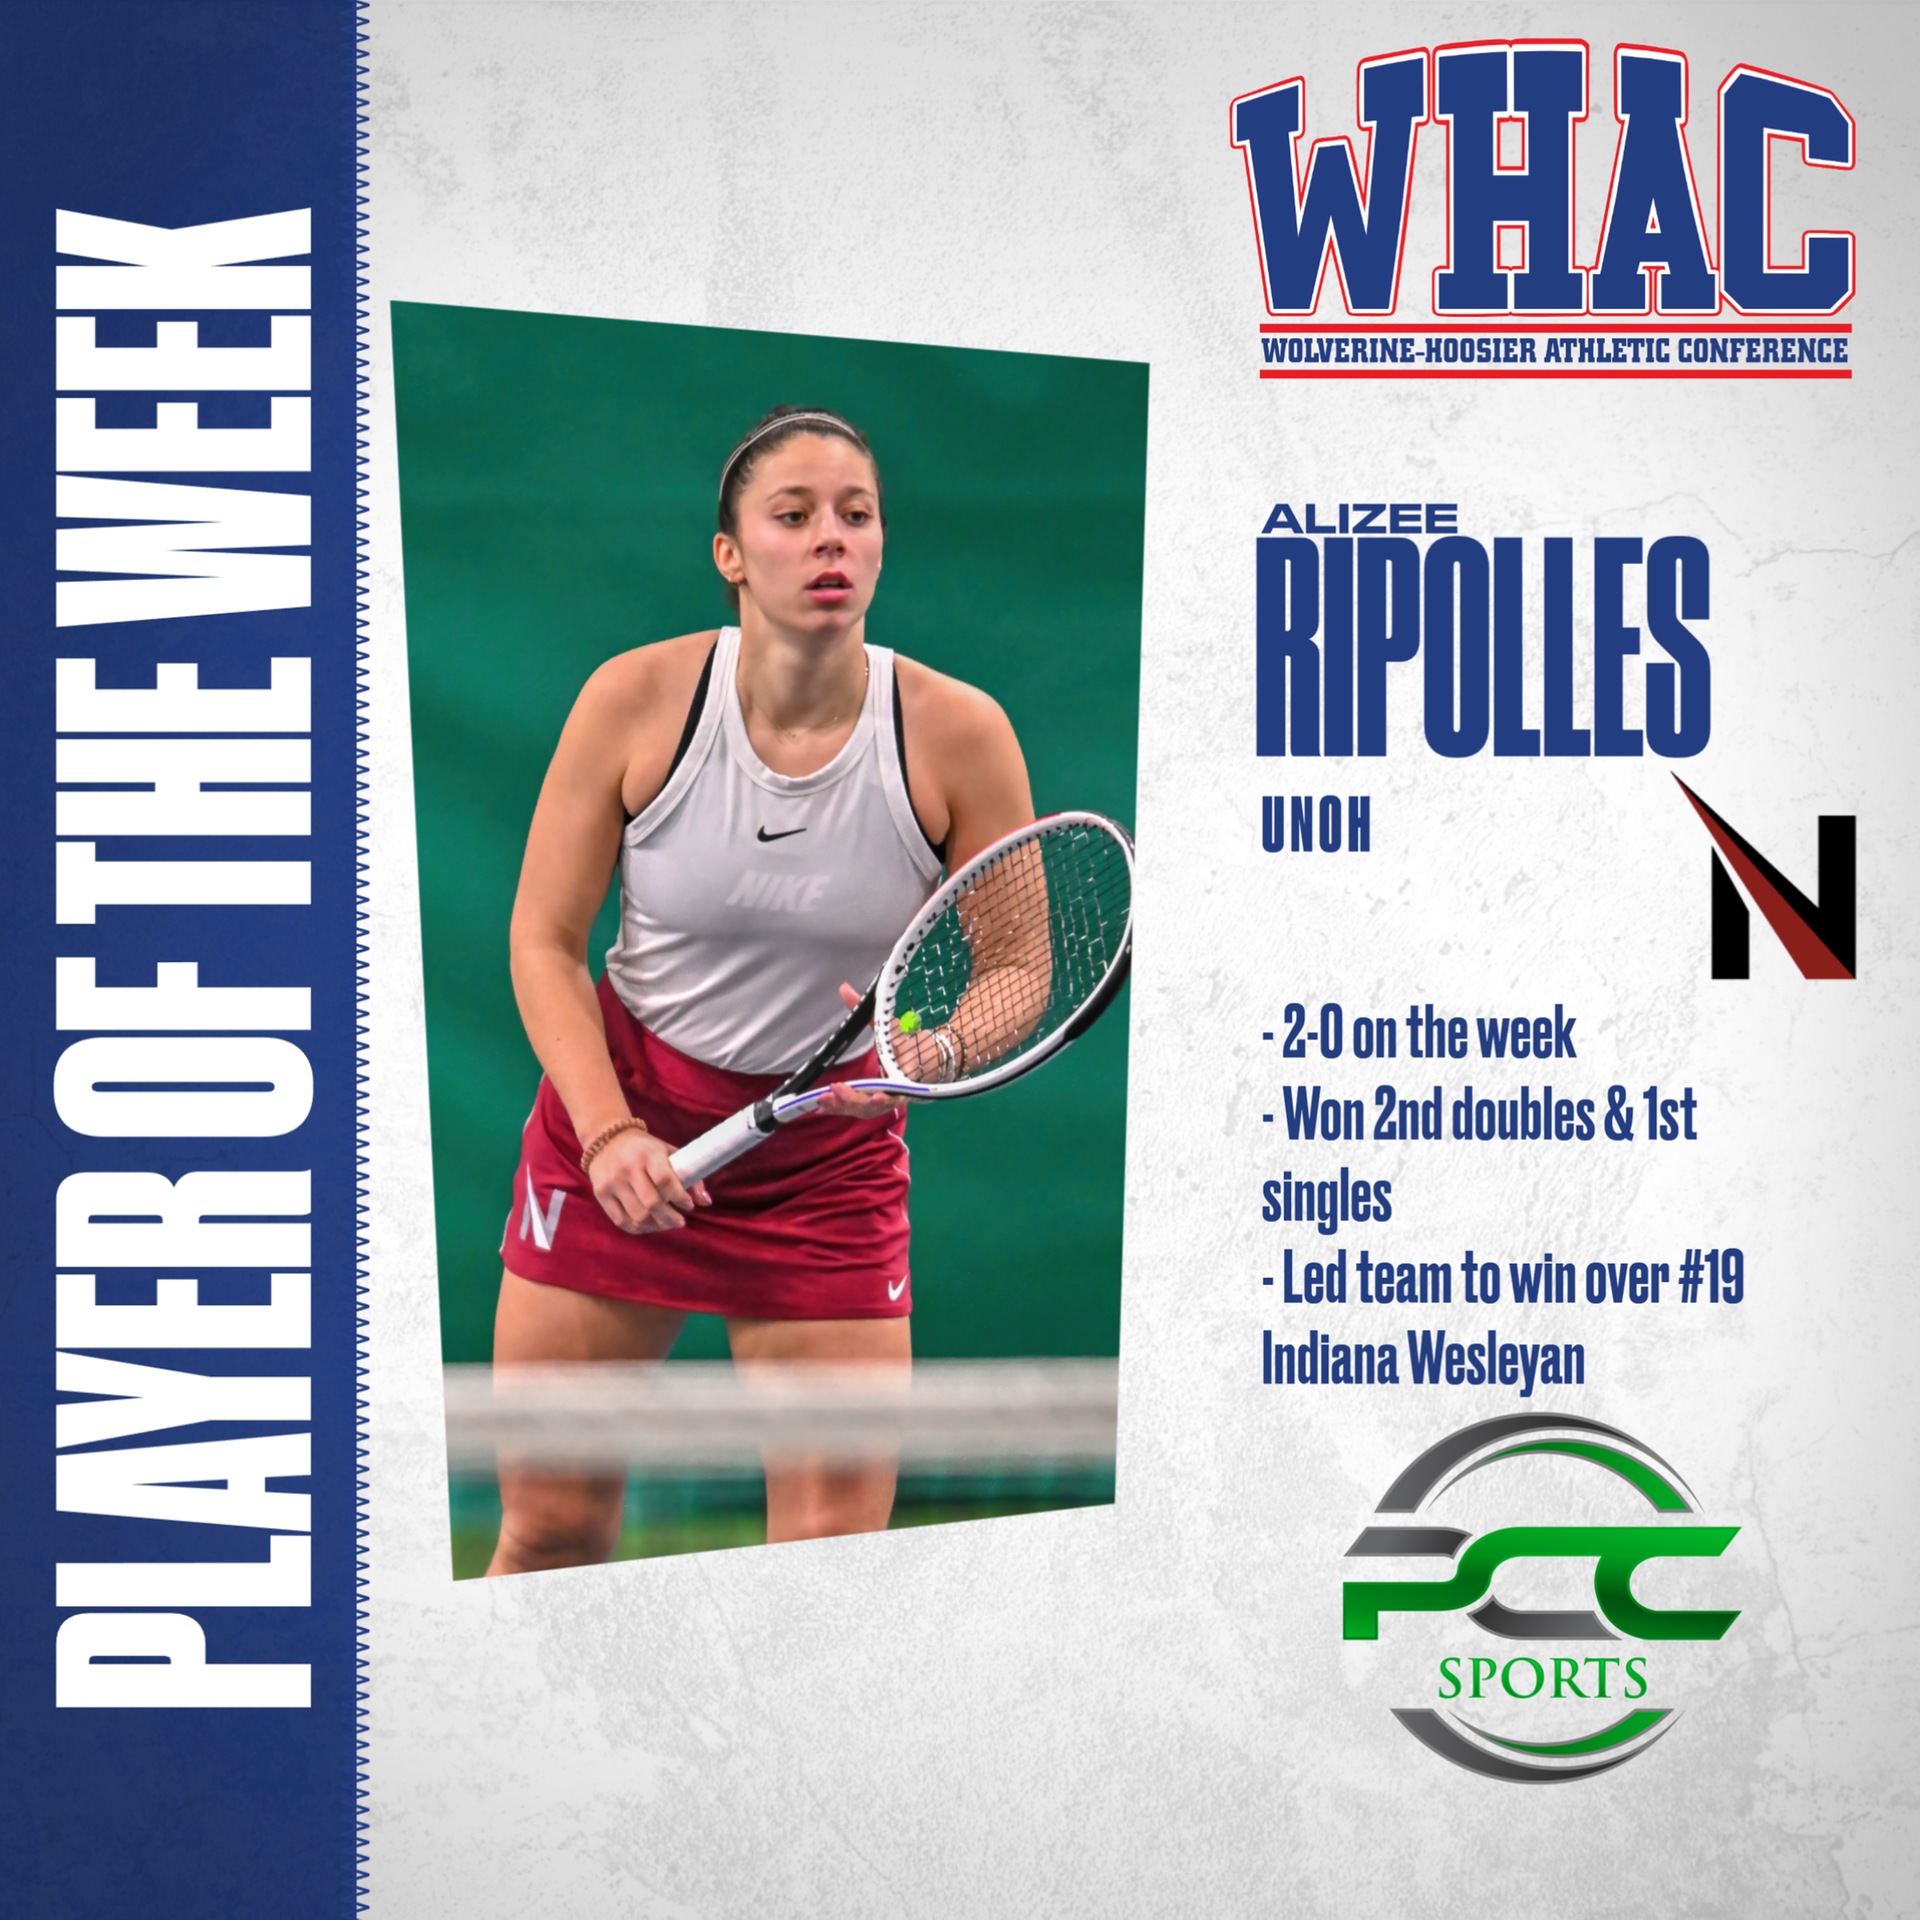 UNOH's Ripolles wins Player of the Week Honors